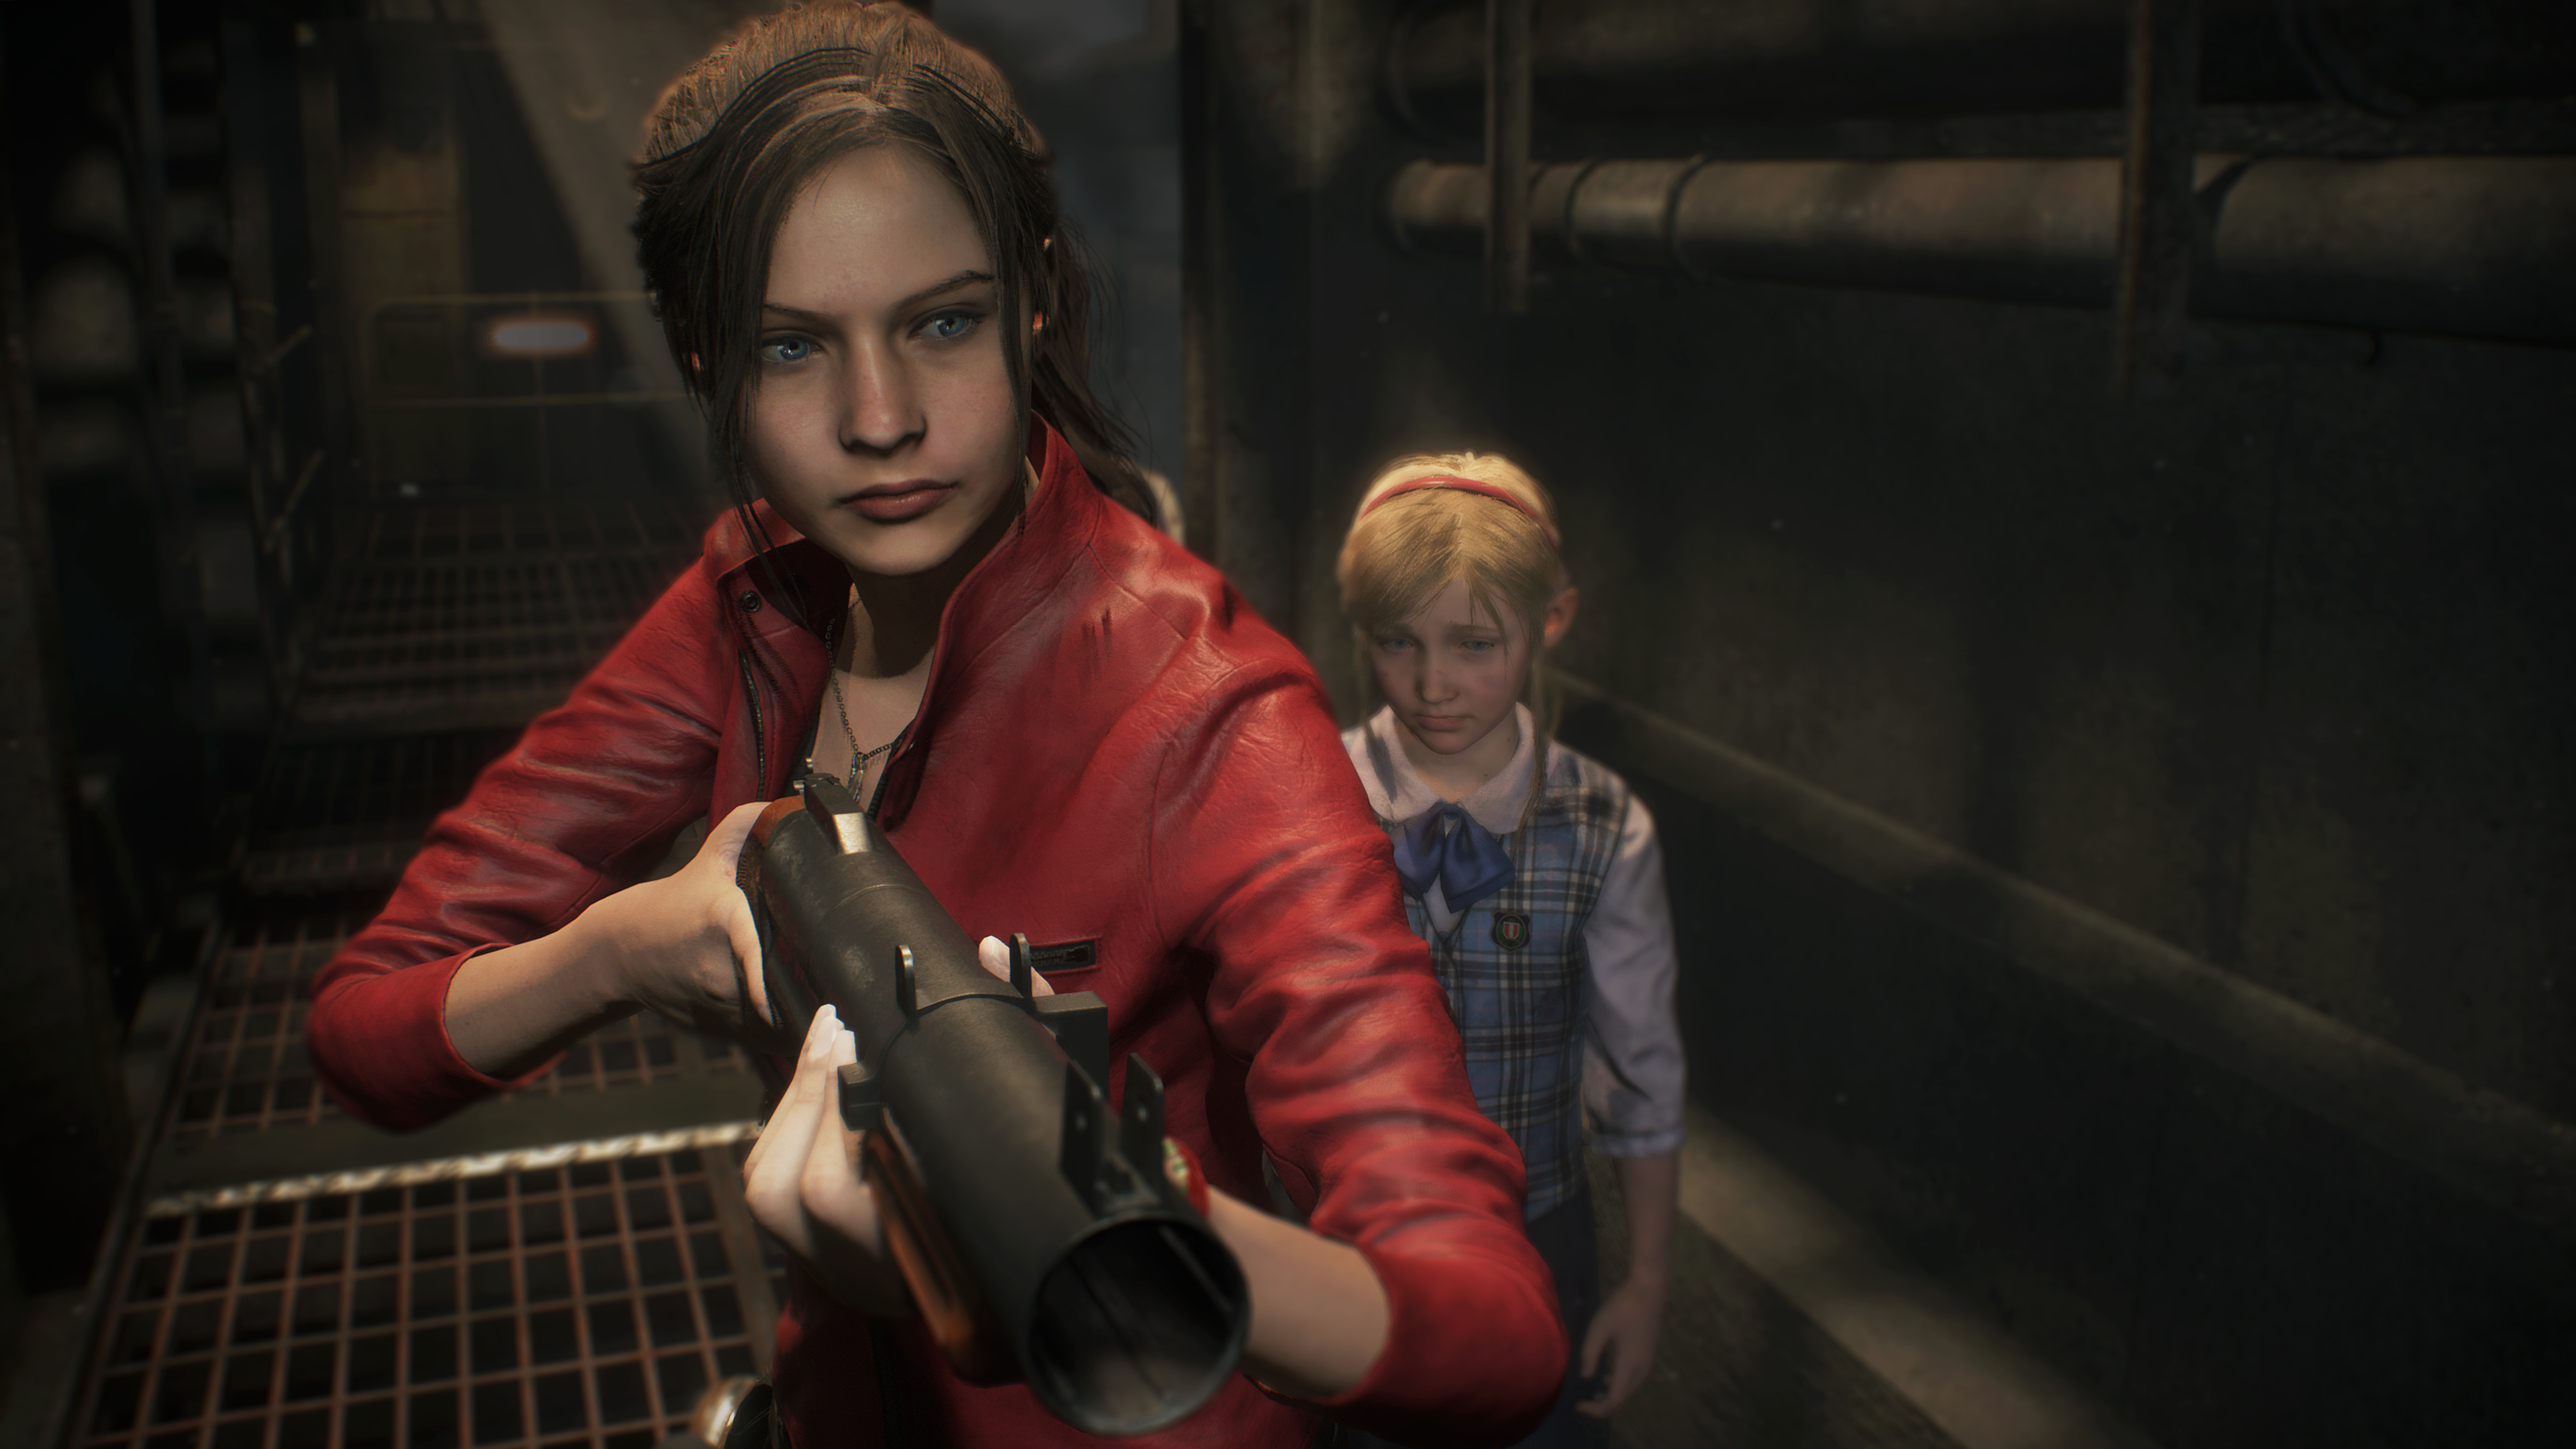 Marketing still from the Resident Evil 2 remake. Claire Redfield (protagonist) holds a shotgun, as she navigates a corridor with a child behind her.